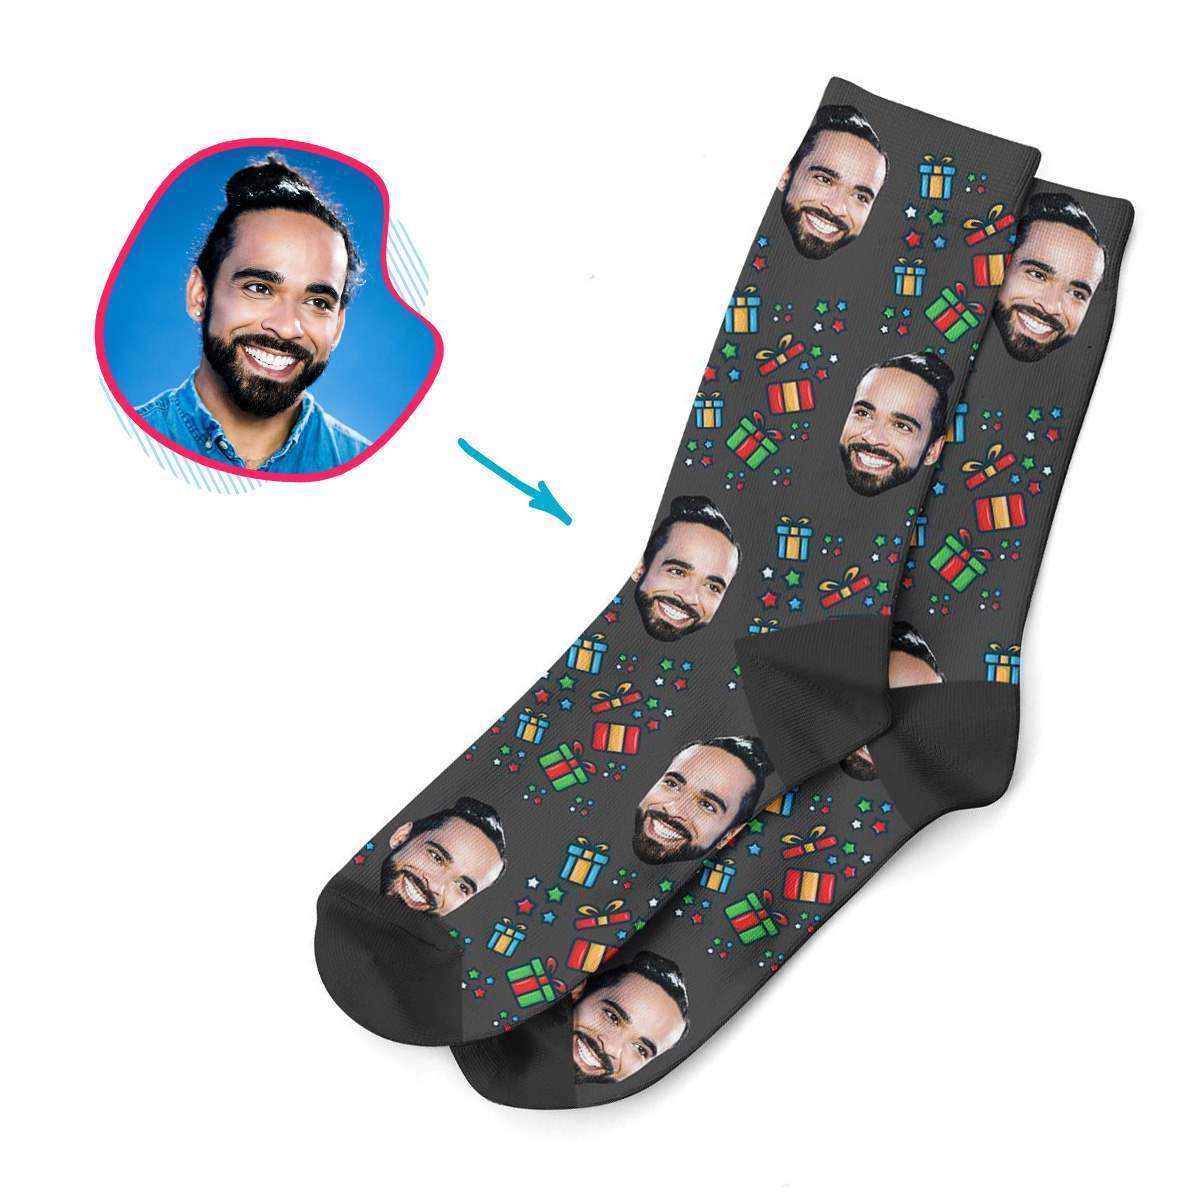 dark Gift Box socks personalized with photo of face printed on them